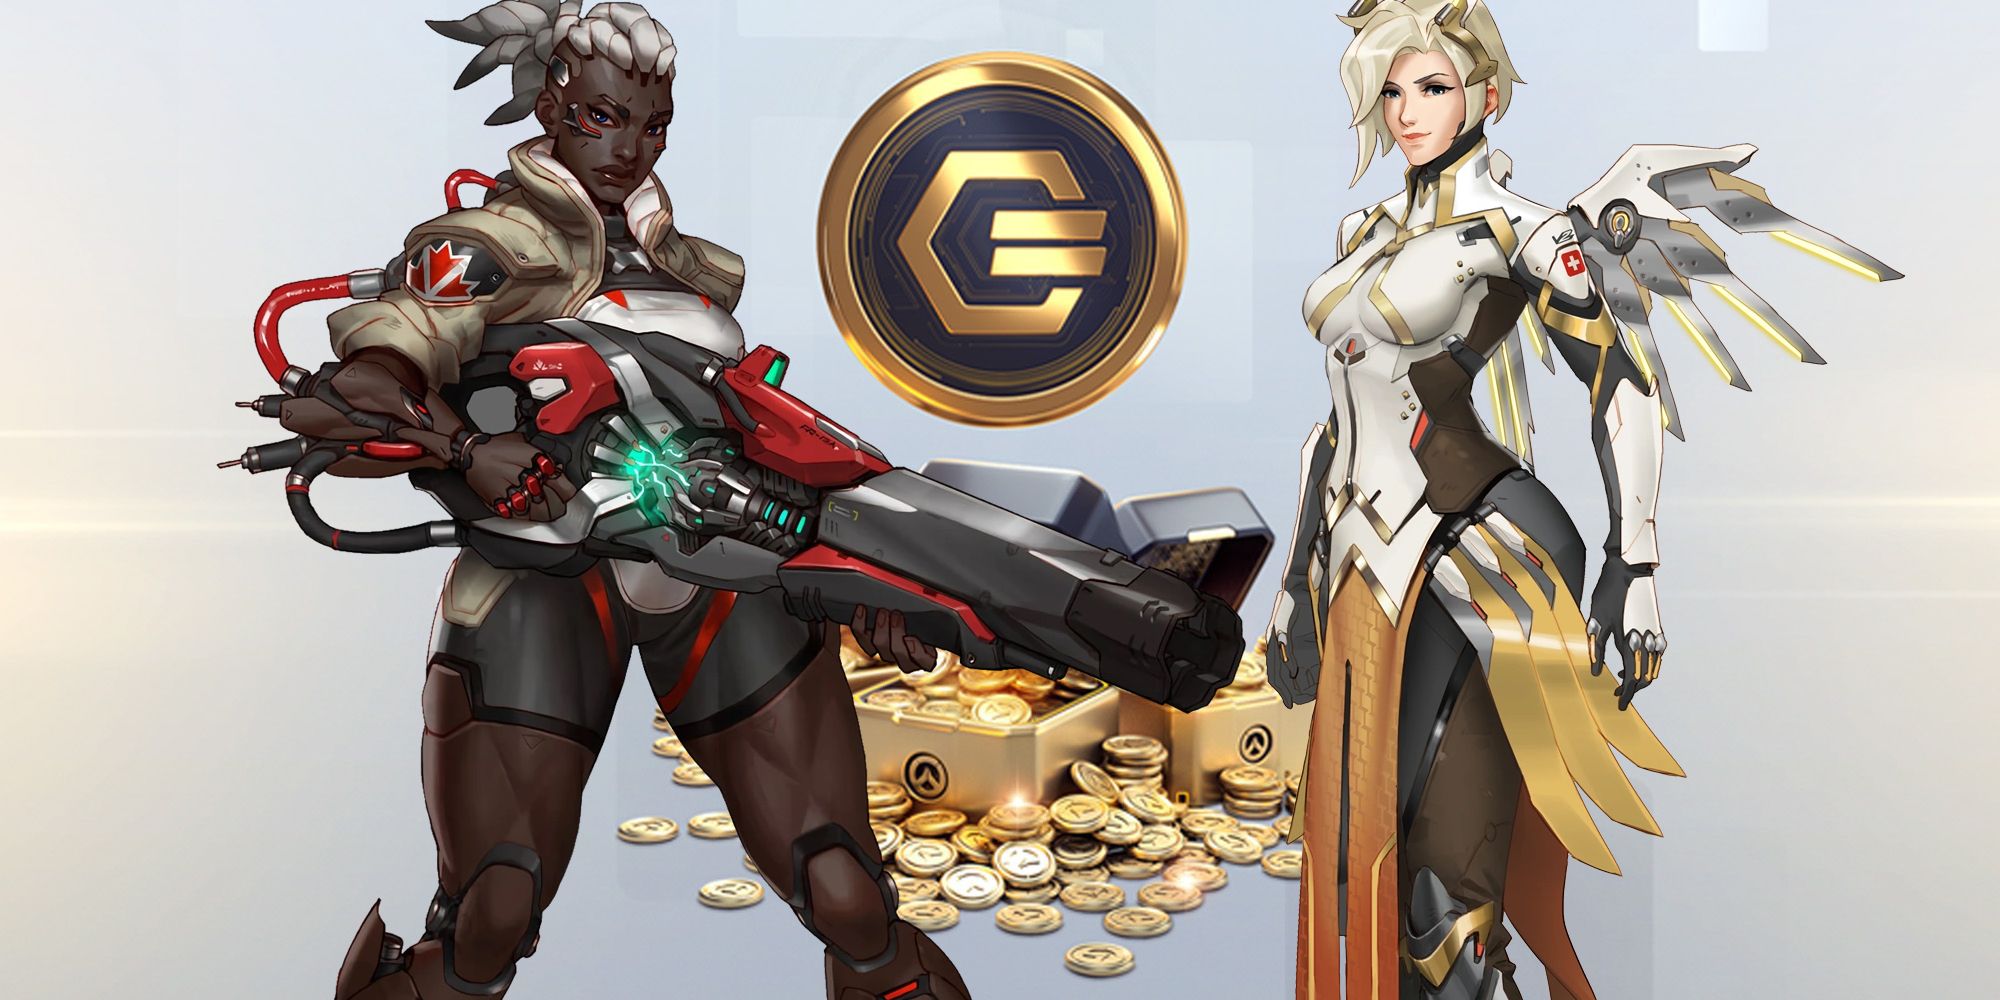 Sojourn and Mercy from Overwatch 2 standing in front of a pile of Overwatch Credits, the game's digital currency.